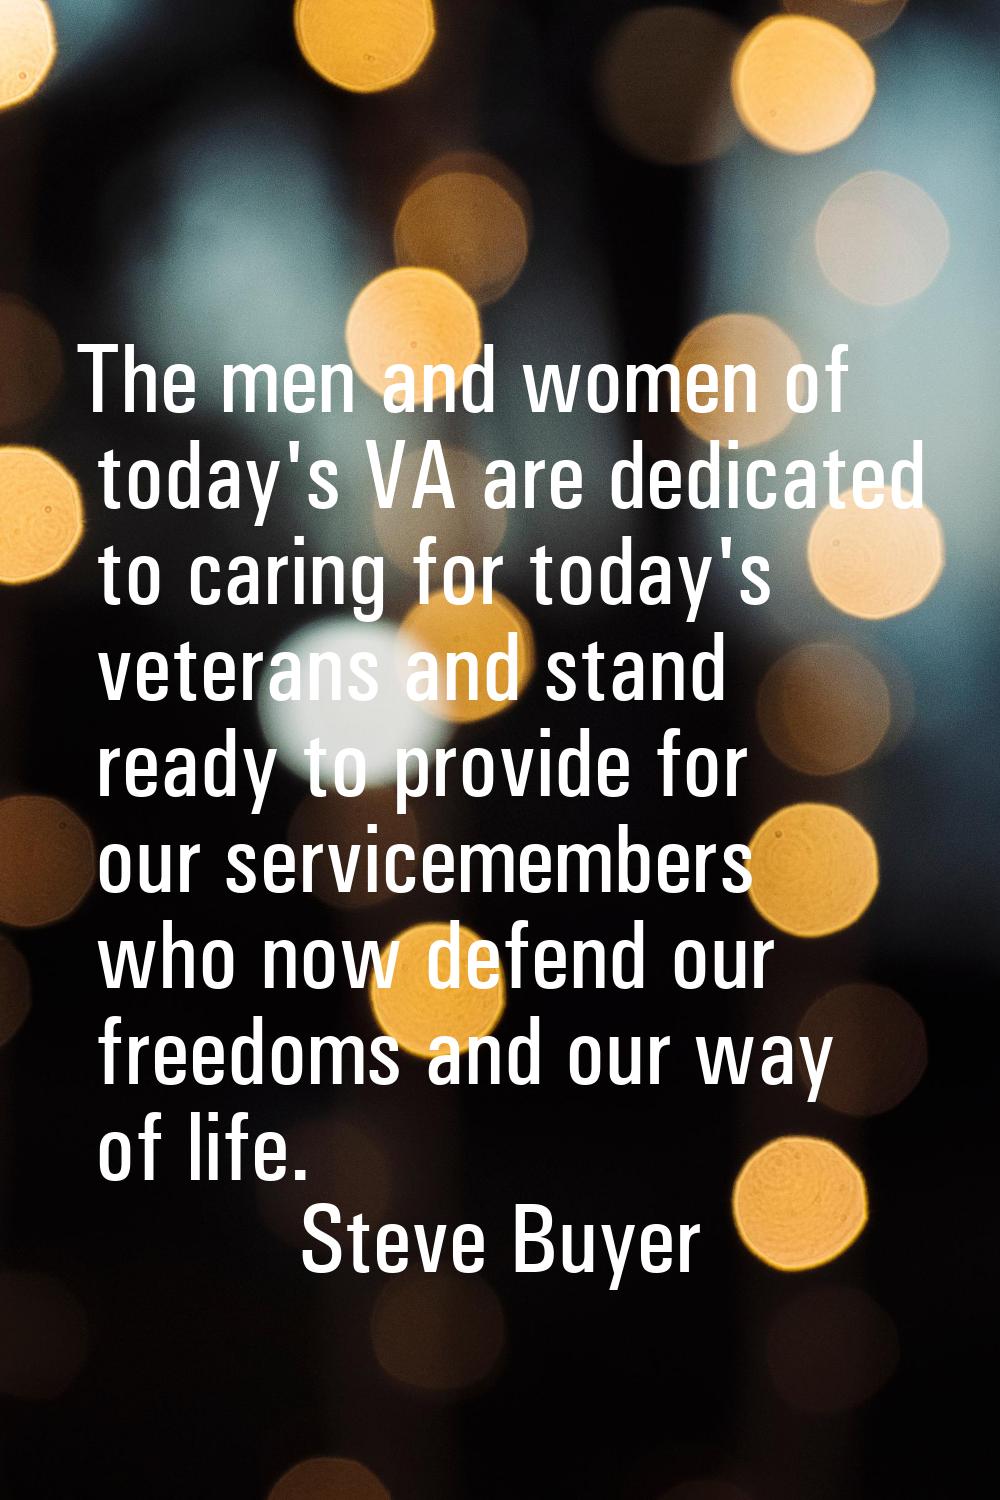 The men and women of today's VA are dedicated to caring for today's veterans and stand ready to pro